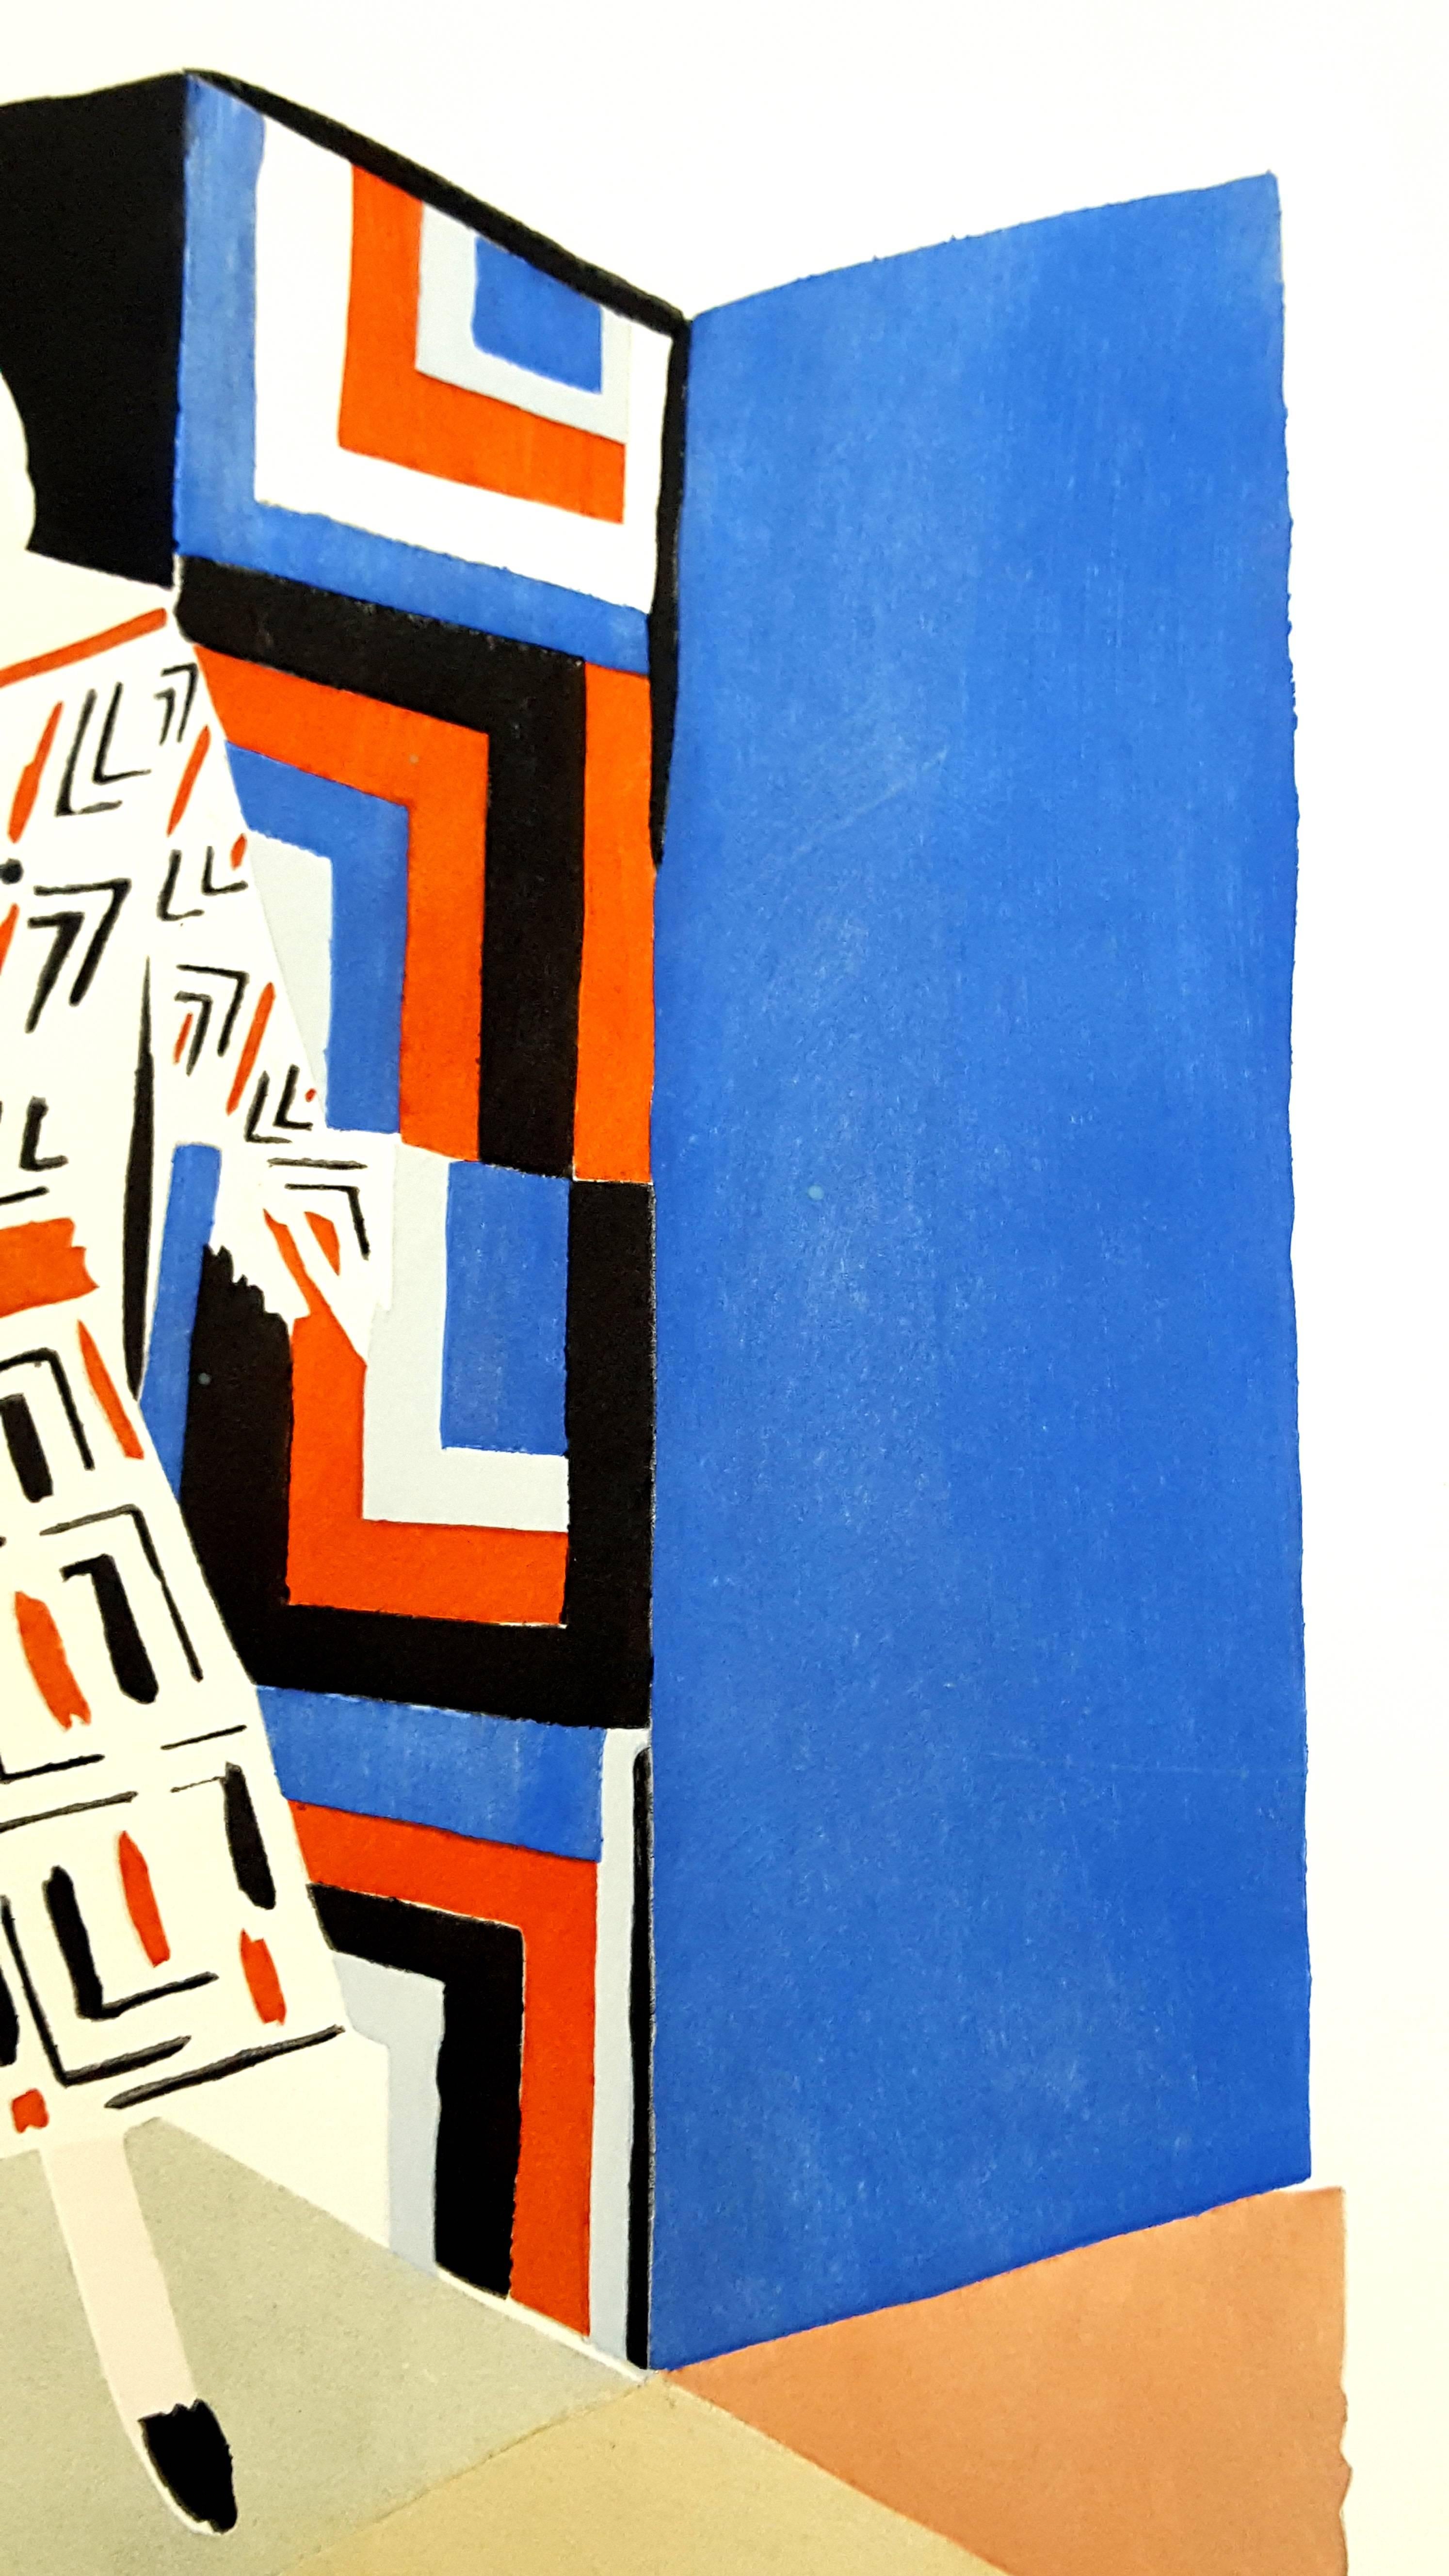 Living Painting - Colour Pochoir - Abstract Geometric Print by (after) Sonia Delaunay